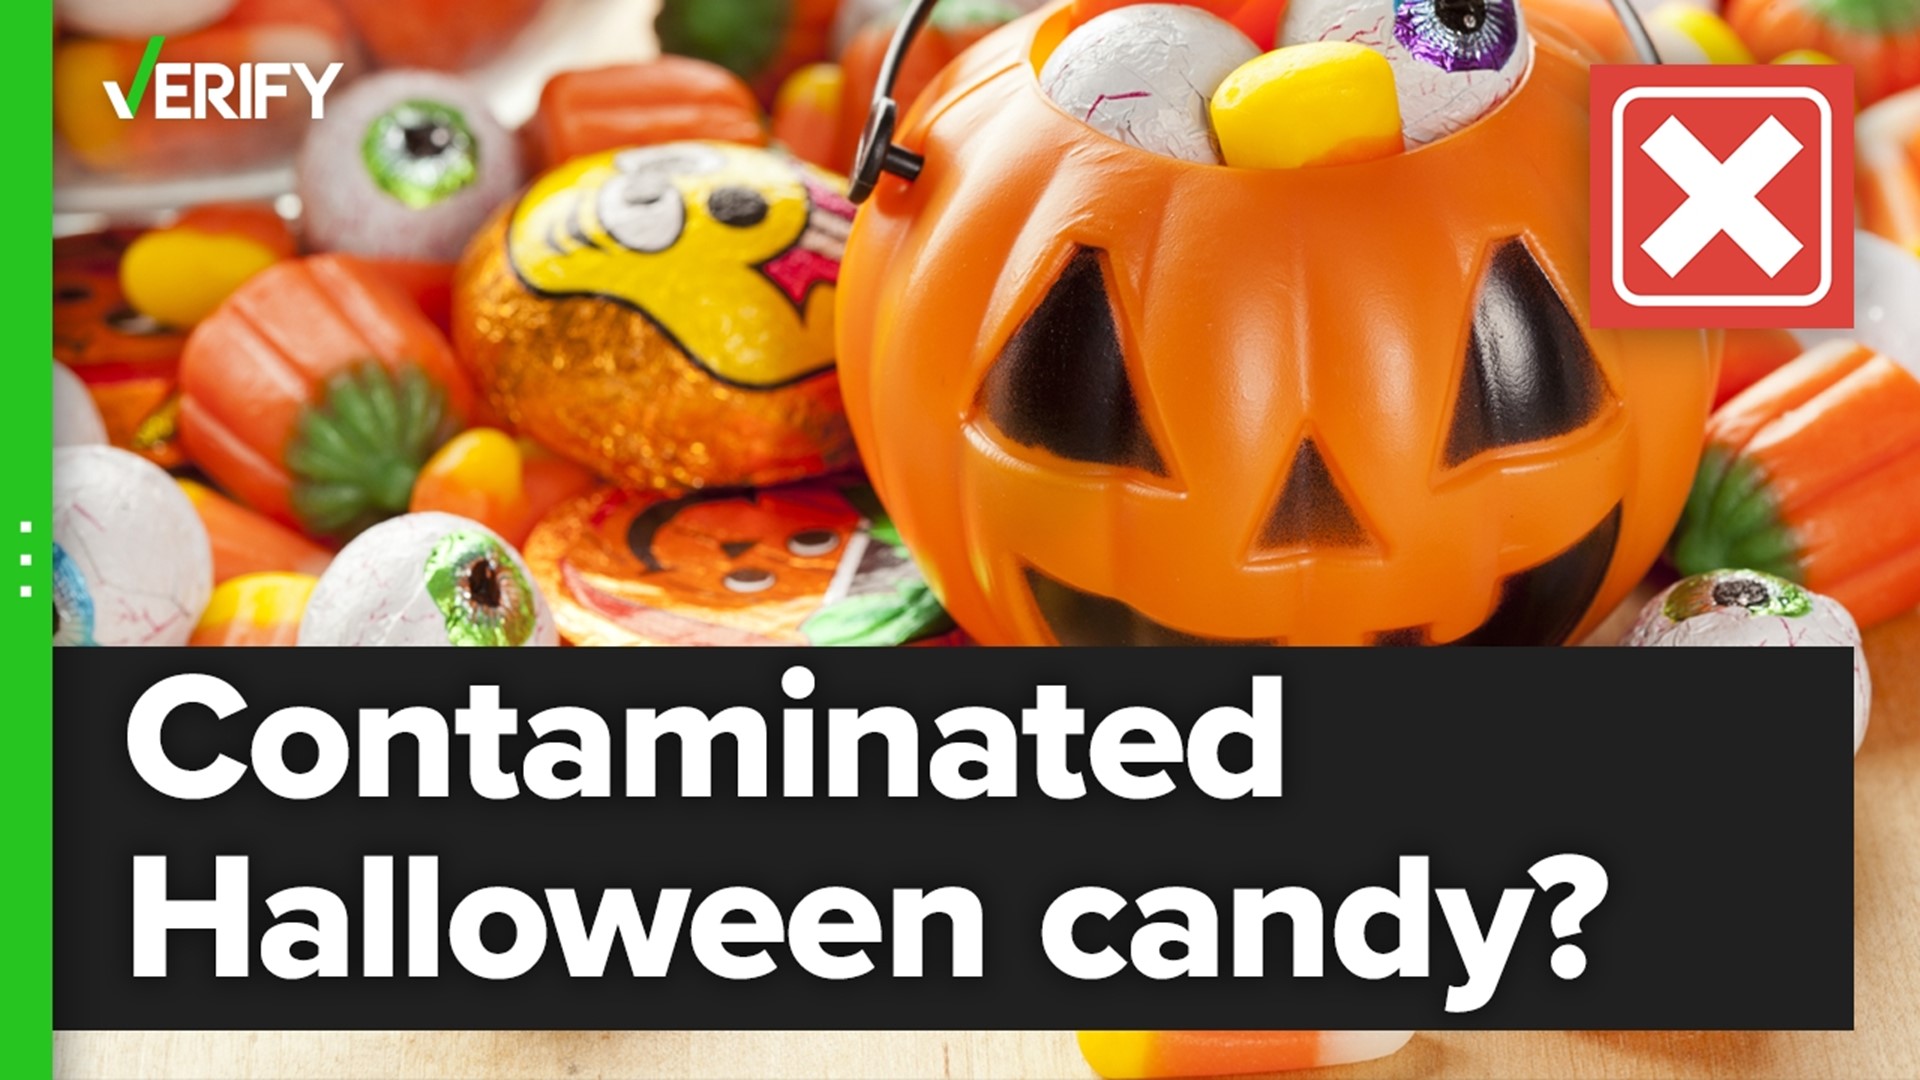 Experts say legitimate reports of children being harmed by contaminated Halloween candy are best understood as contemporary legends or urban myths.